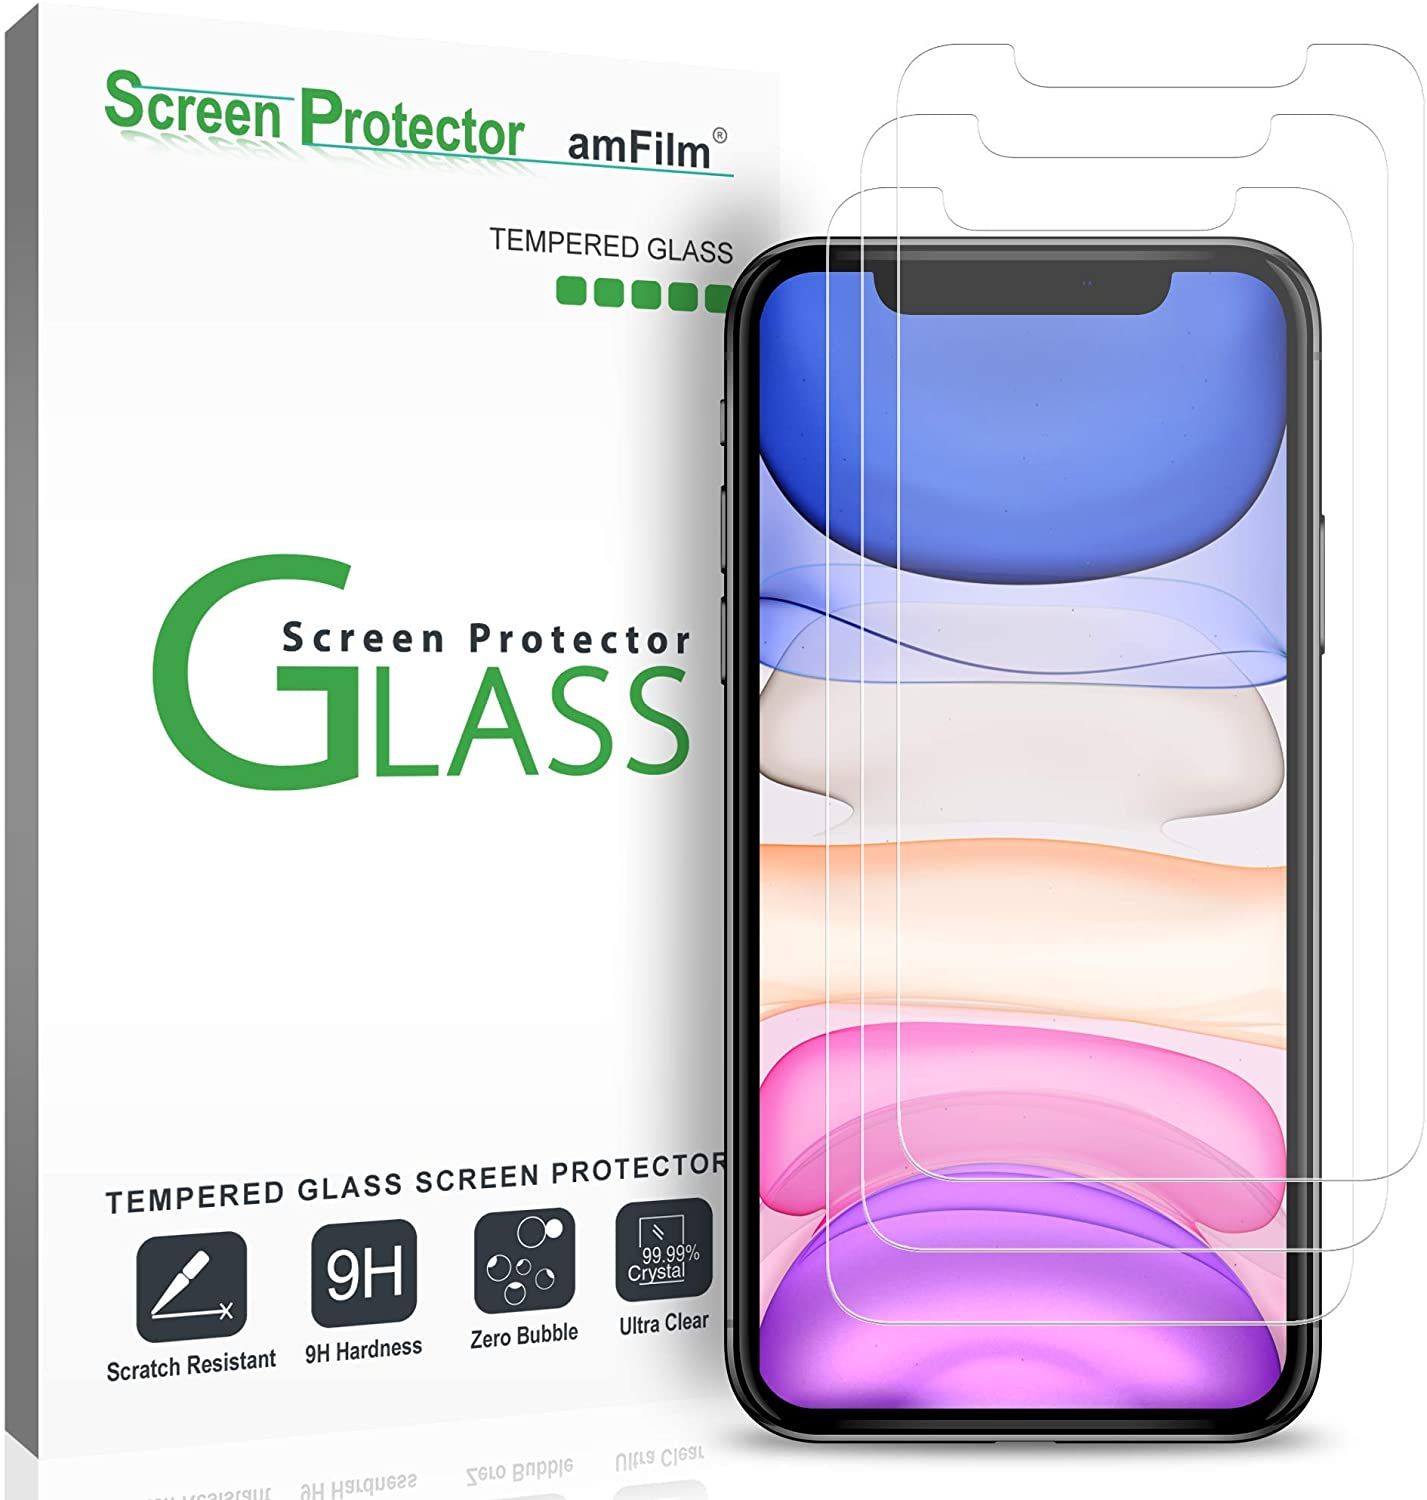 Strong Scratch Protection High Transparency Multitouch Optimized upscreen Scratch Shield Clear Screen Protector for Ciclo Navic 20 